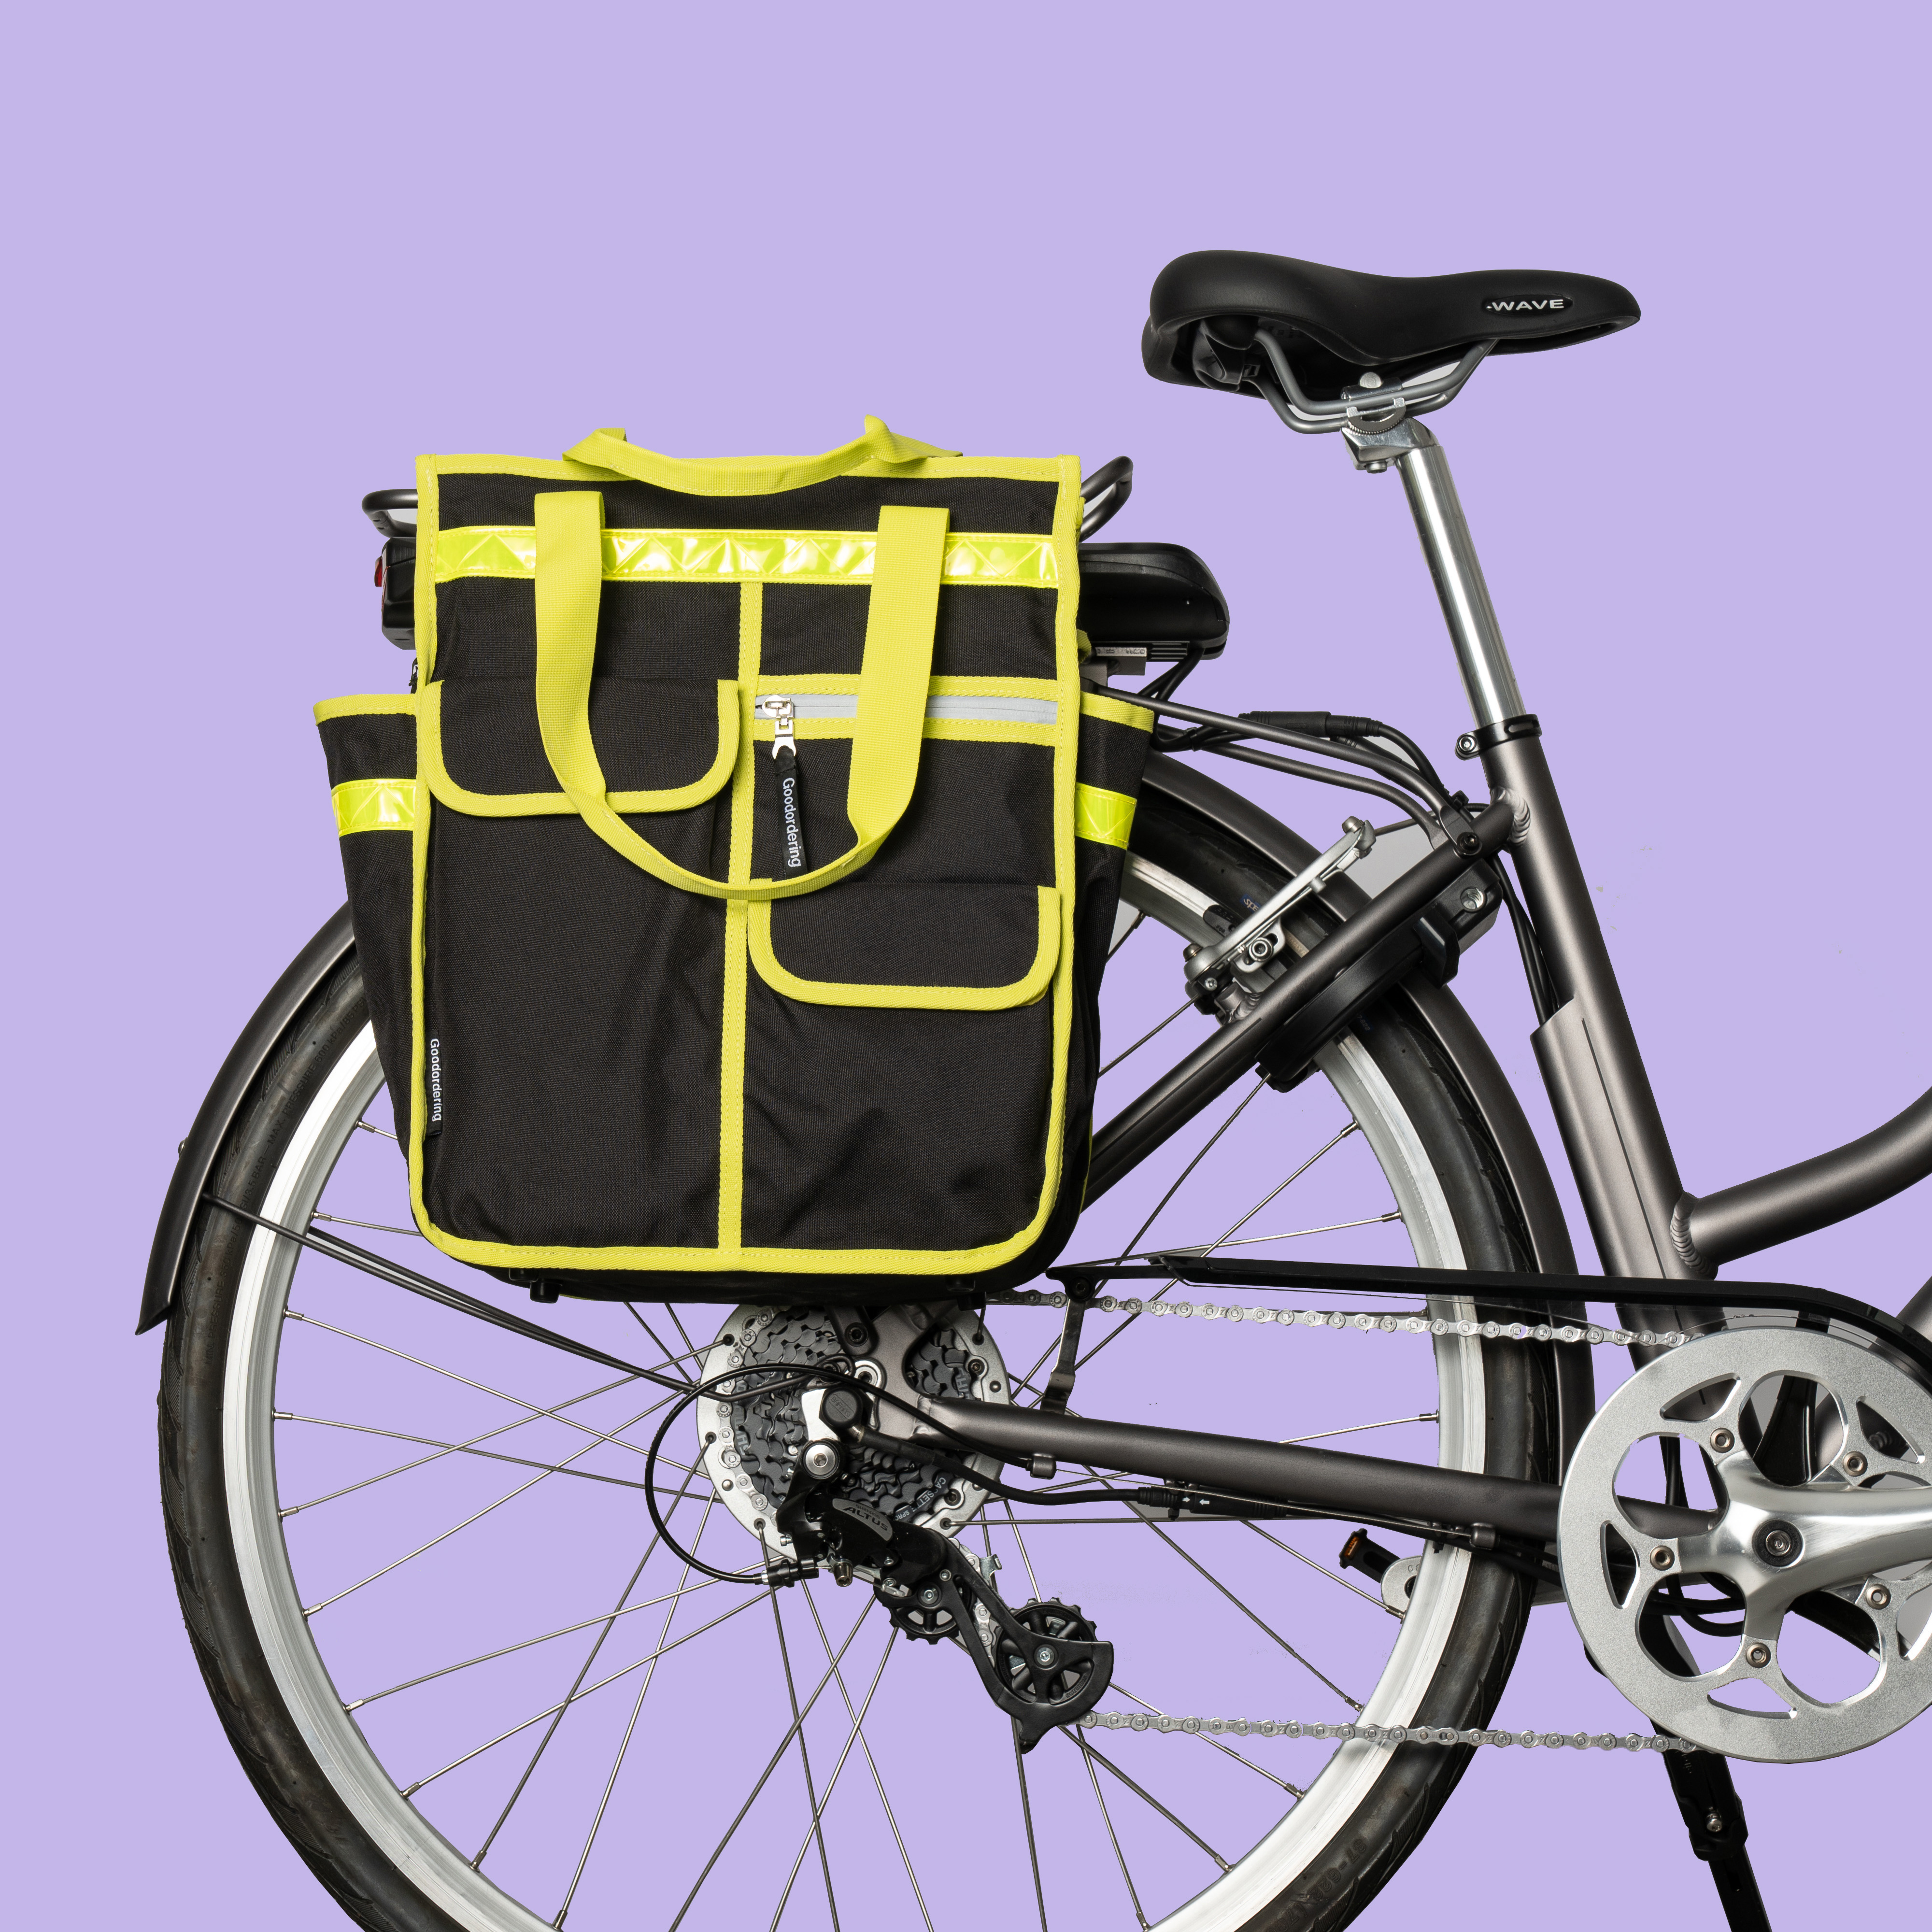 goodordering-neon-yellow-and-black-shopper-bicycle-pannier-bag